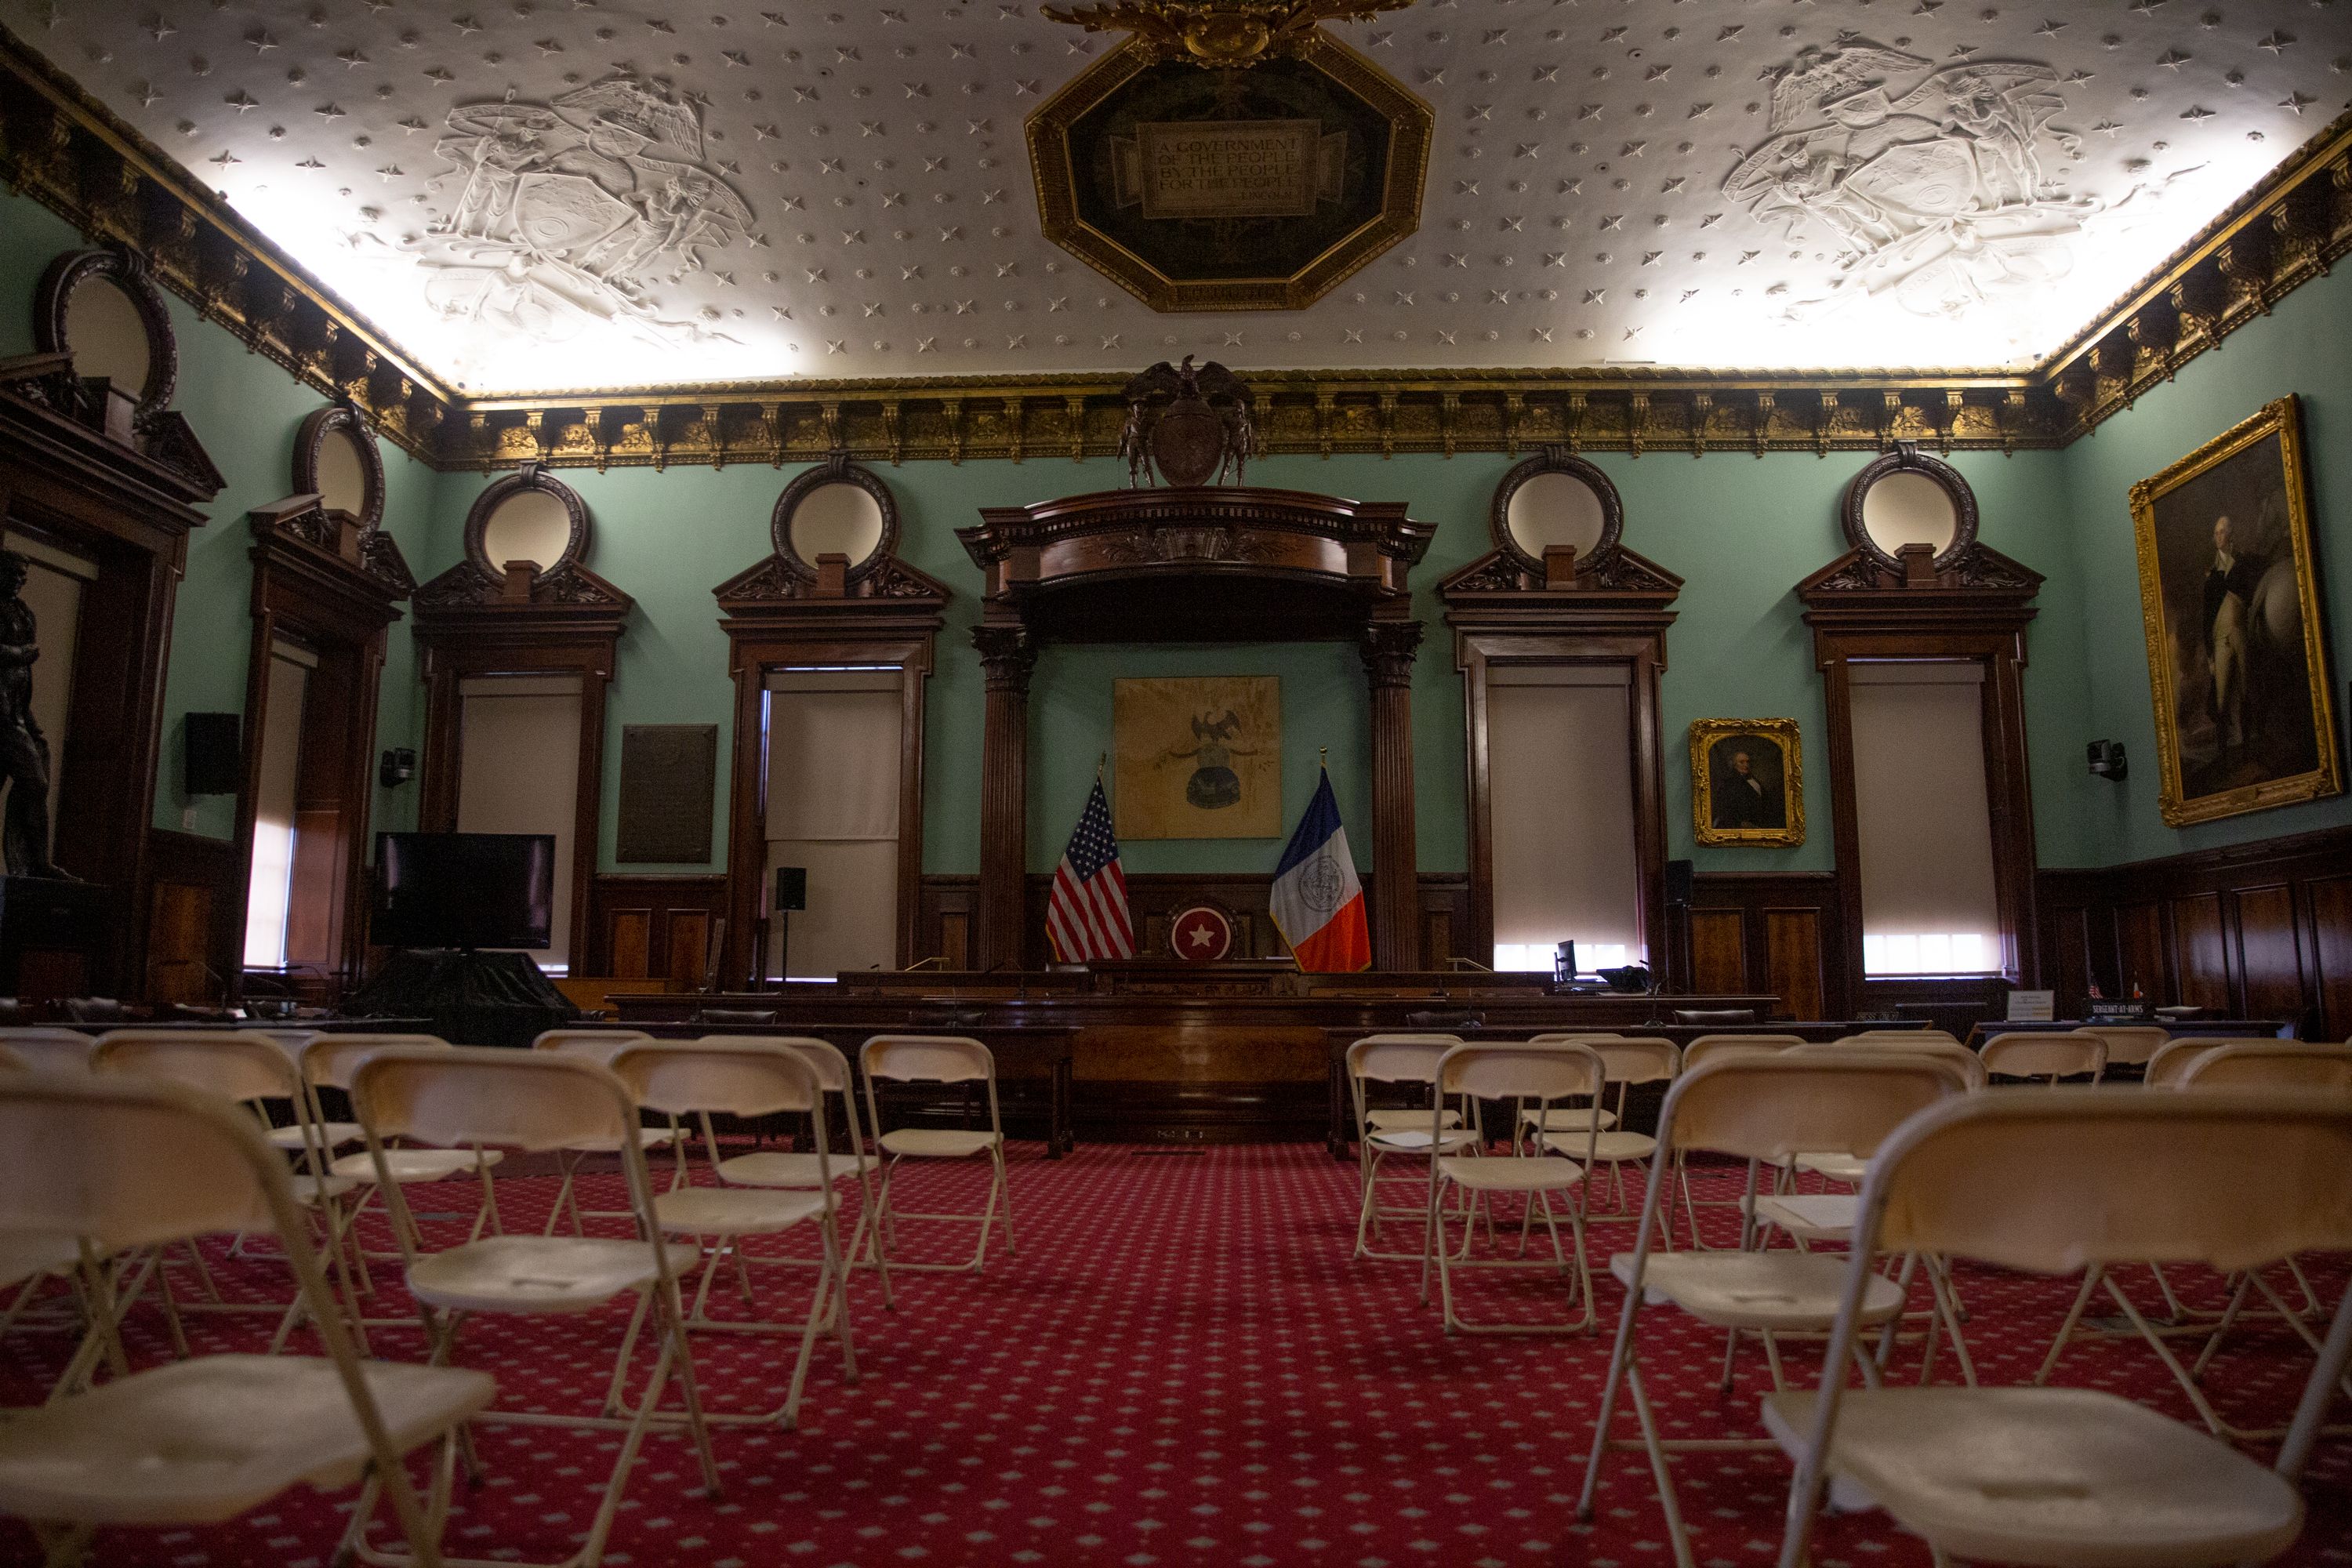 The City Council chambers were empty while large gathering places were closed to prevent the spread of the coronavirus.